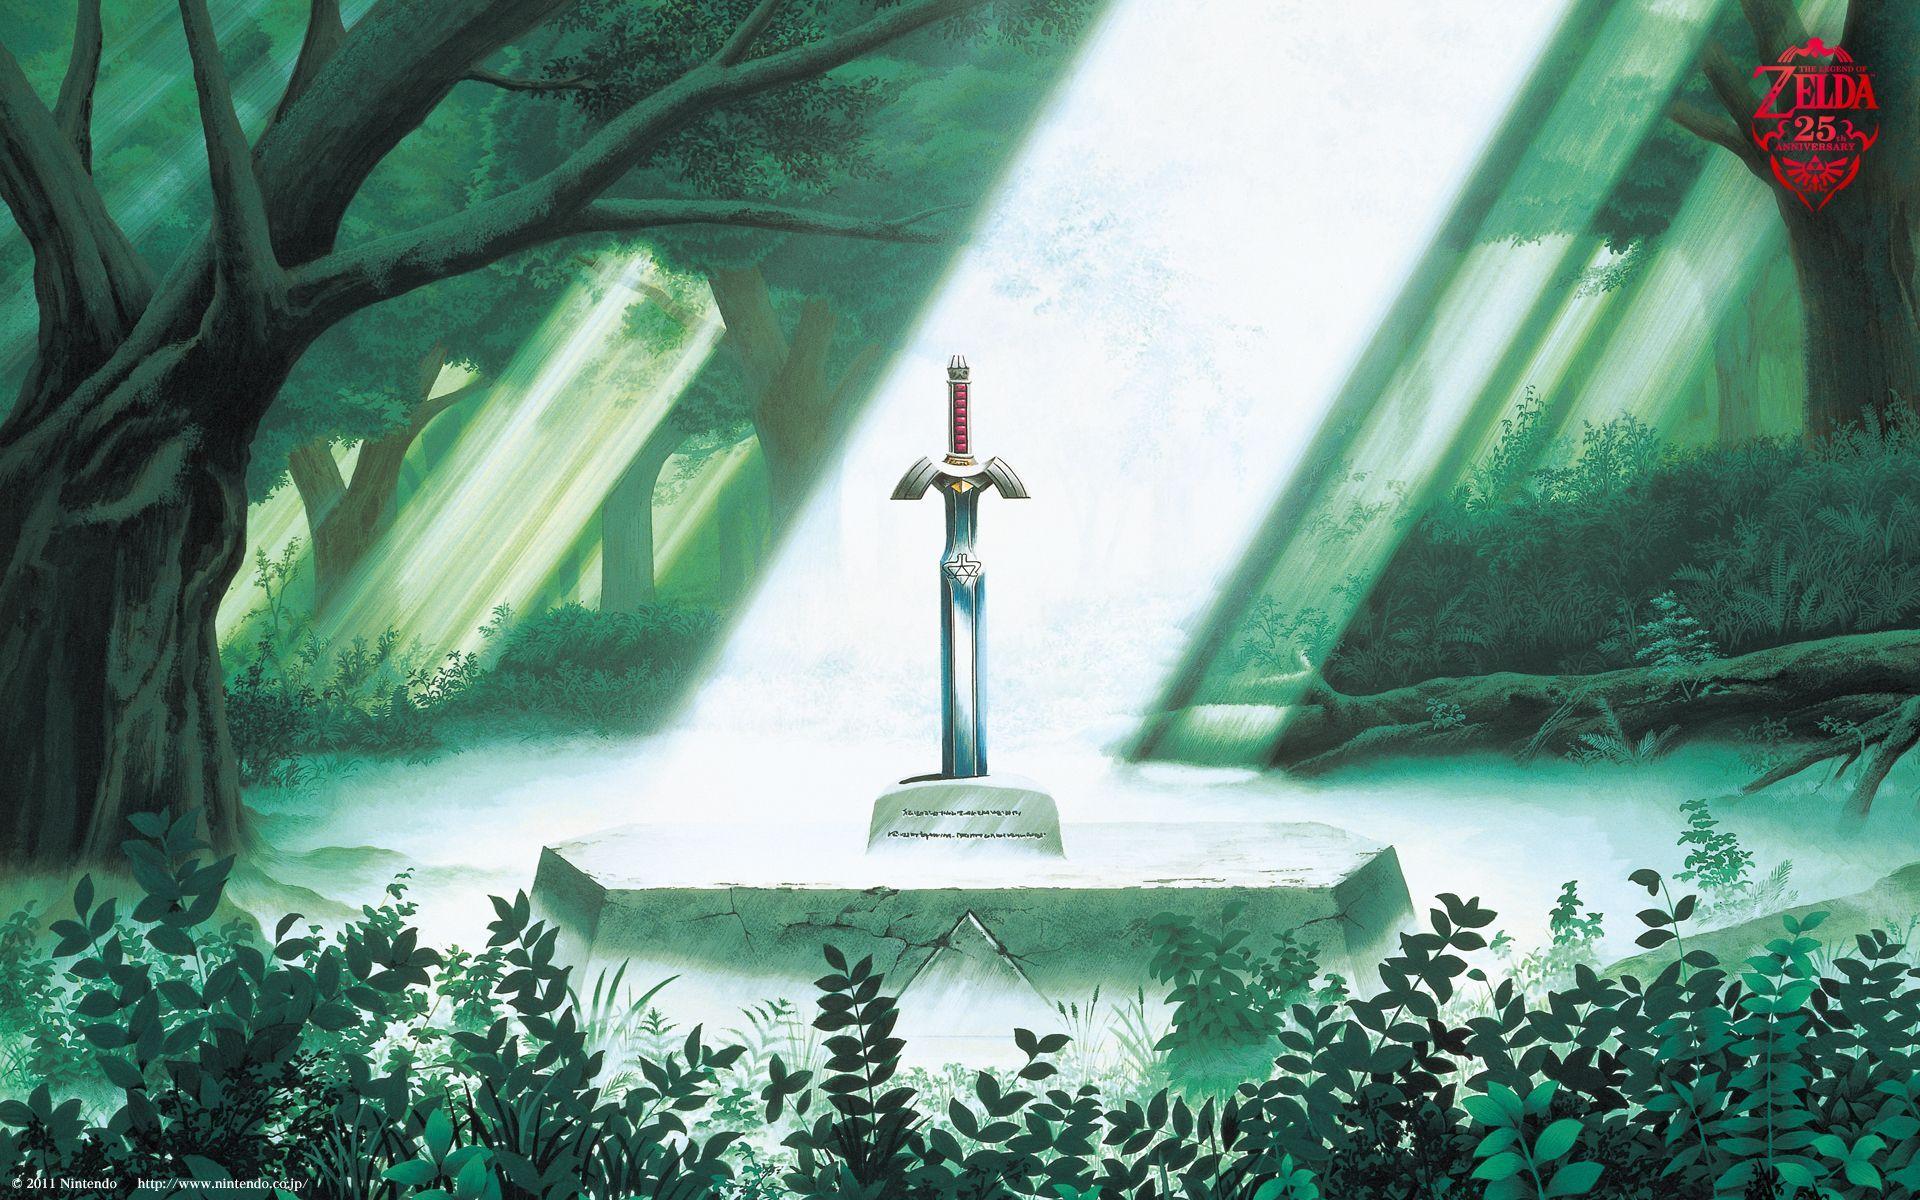 Life's Waiting for you to get your Master Sword. Adventure